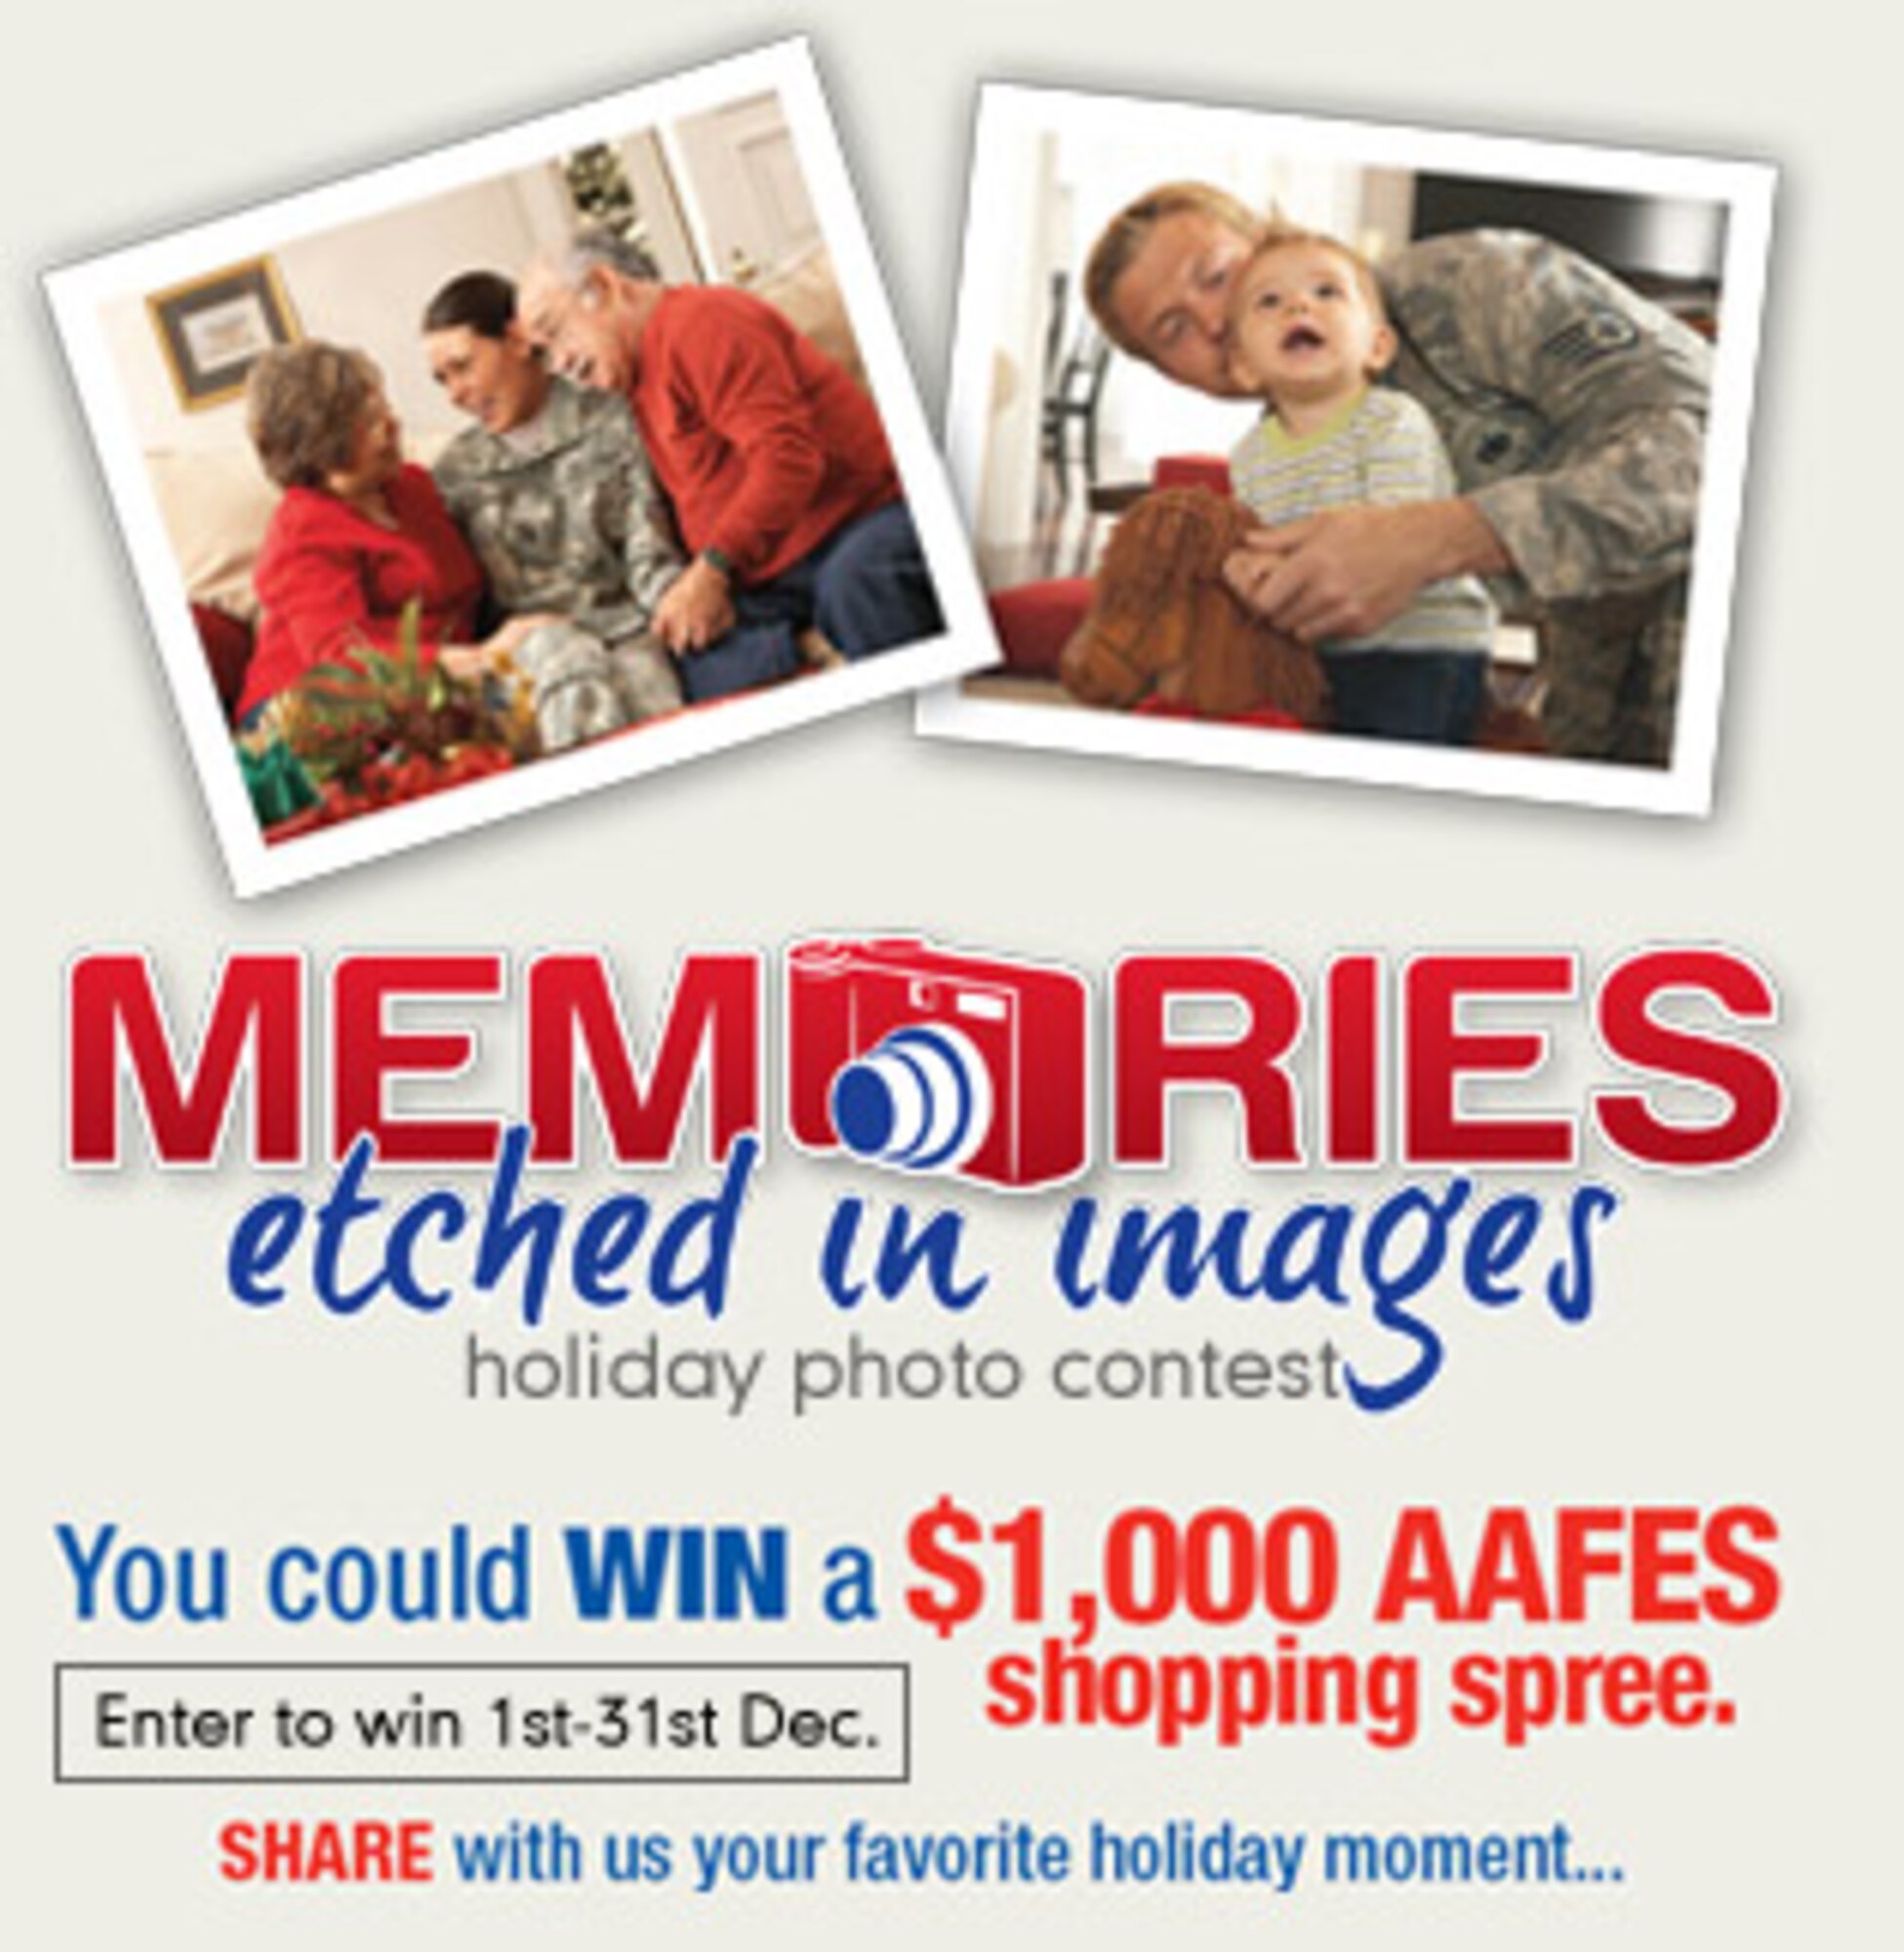 VANDENBERG AIR FORCE BASE, Calif. --  The Army & Air Force Exchange Service is encouraging military shoppers to share those memories for a shot at a $1,000 shopping spree in the “Memories Etched in Images Holiday Photo Contest.” (Courtesy graphic)